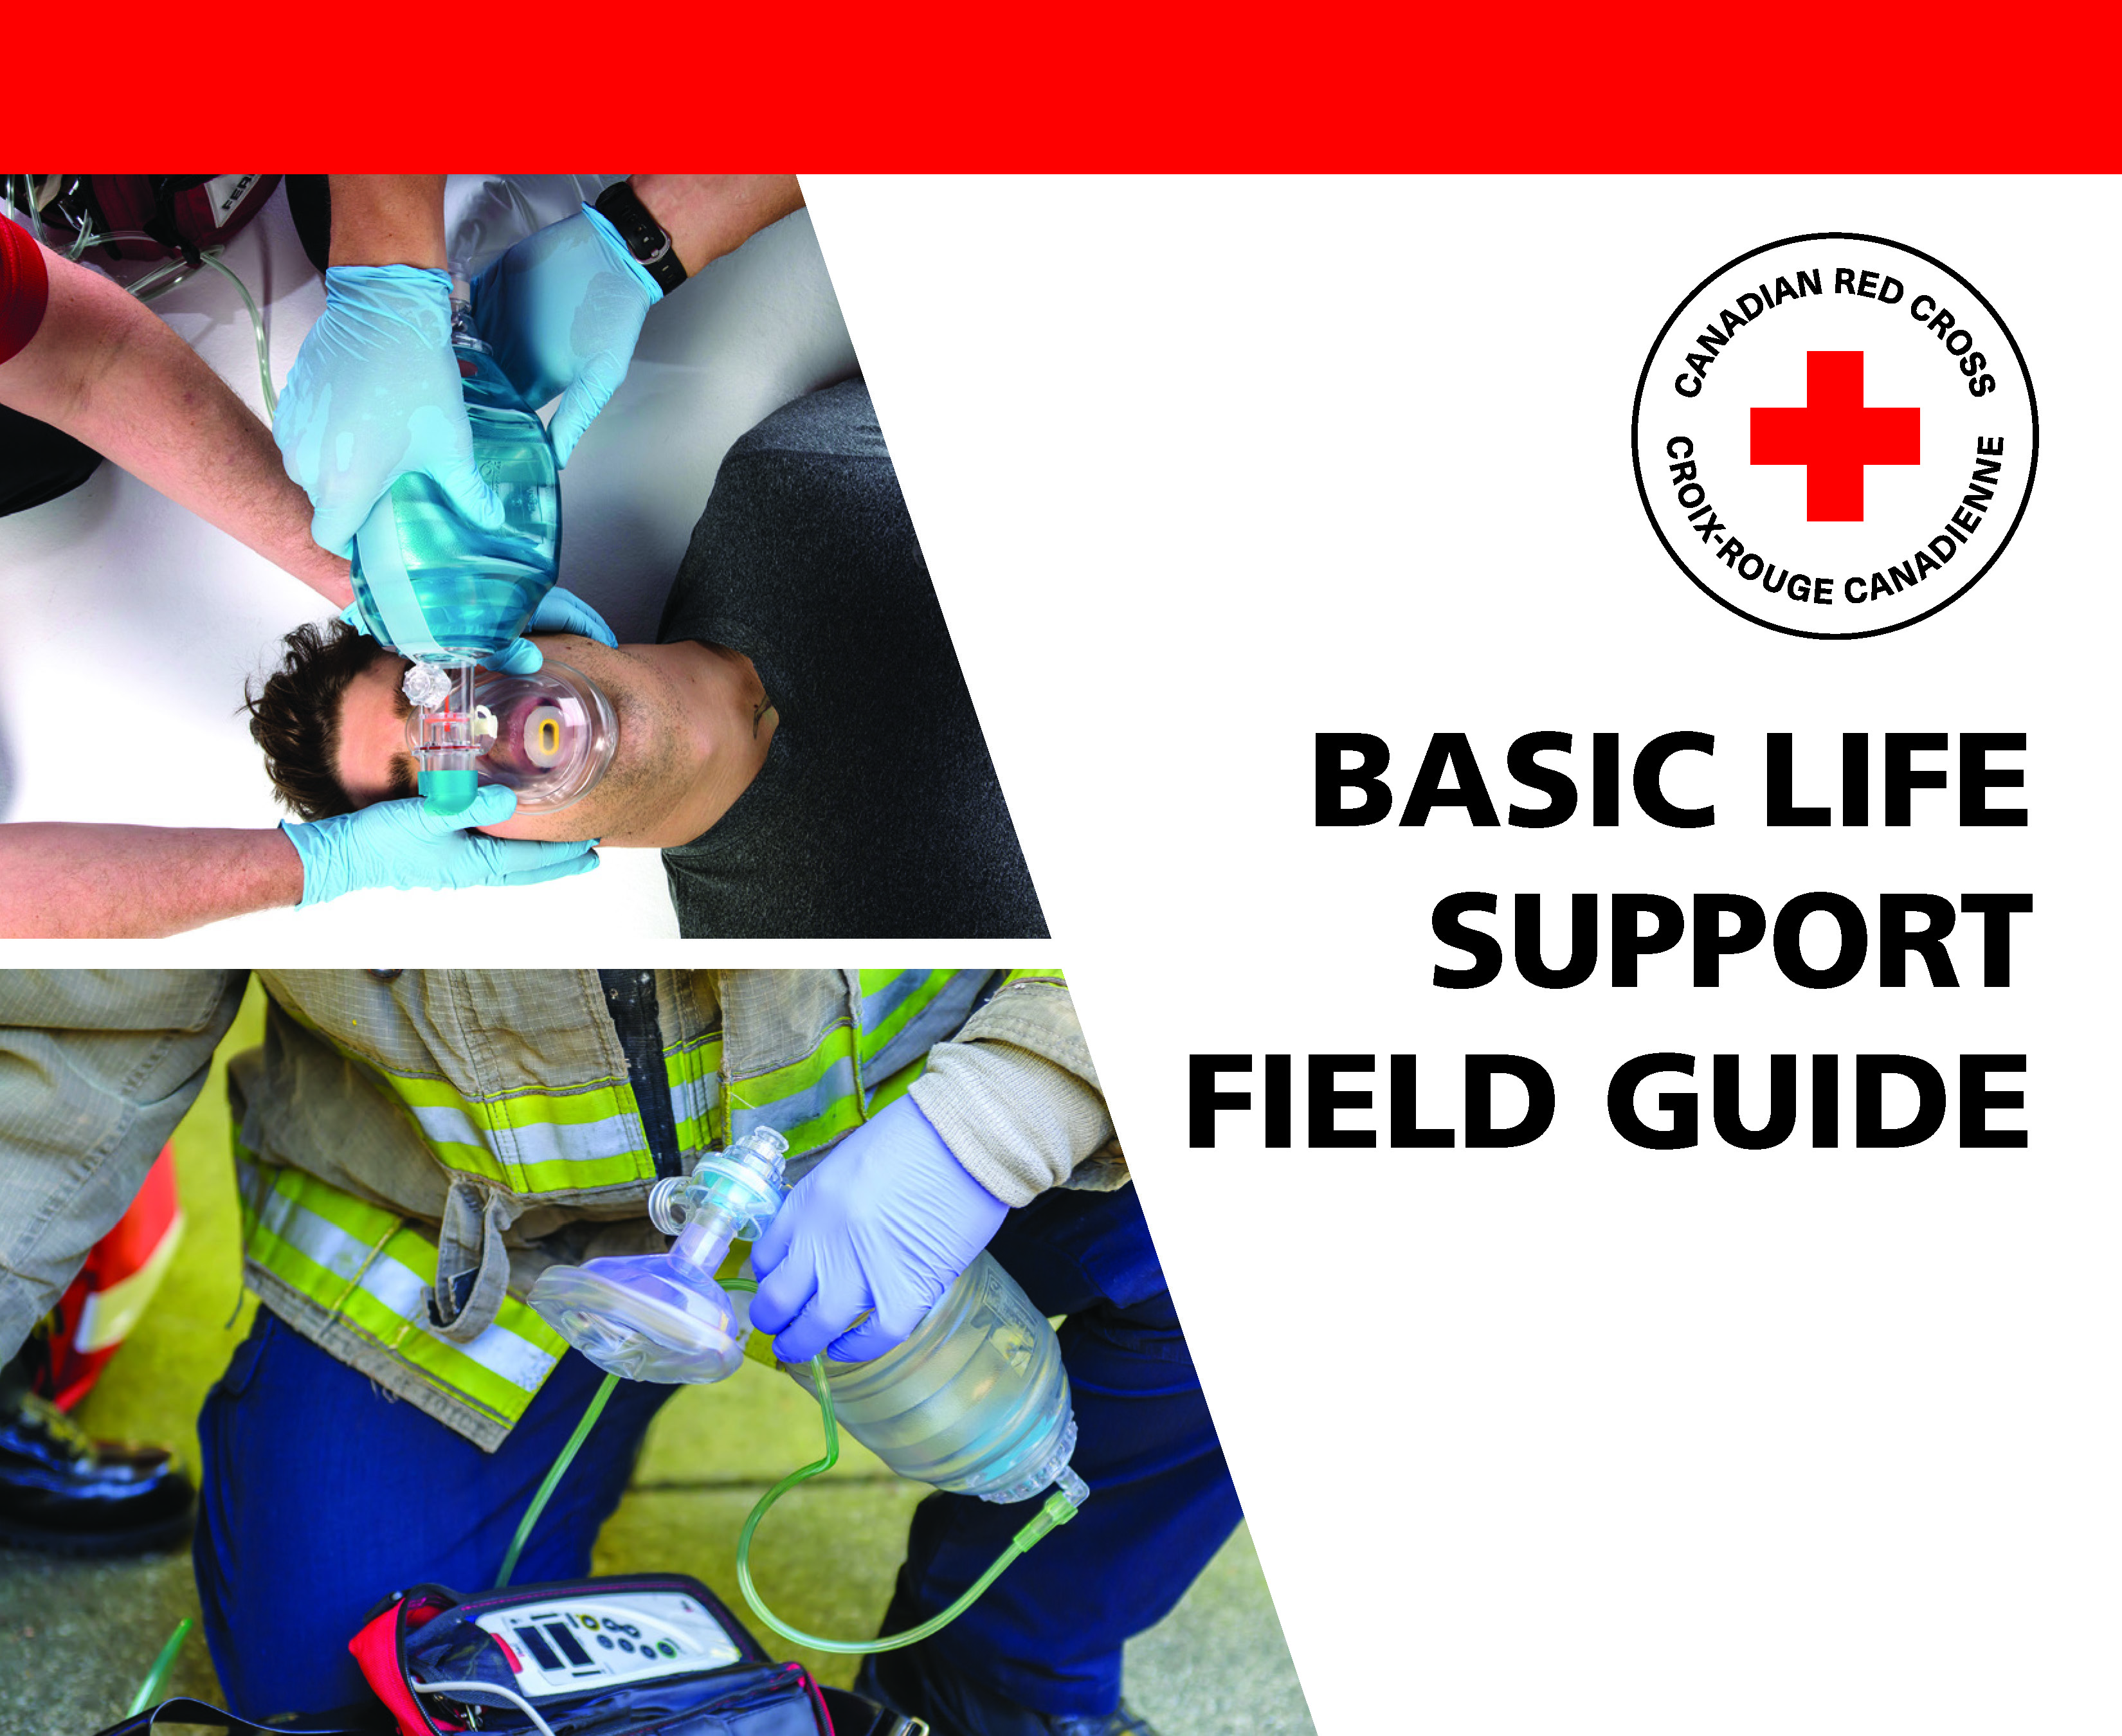 First Aid Course Materials for Basic Life Support in Burnaby